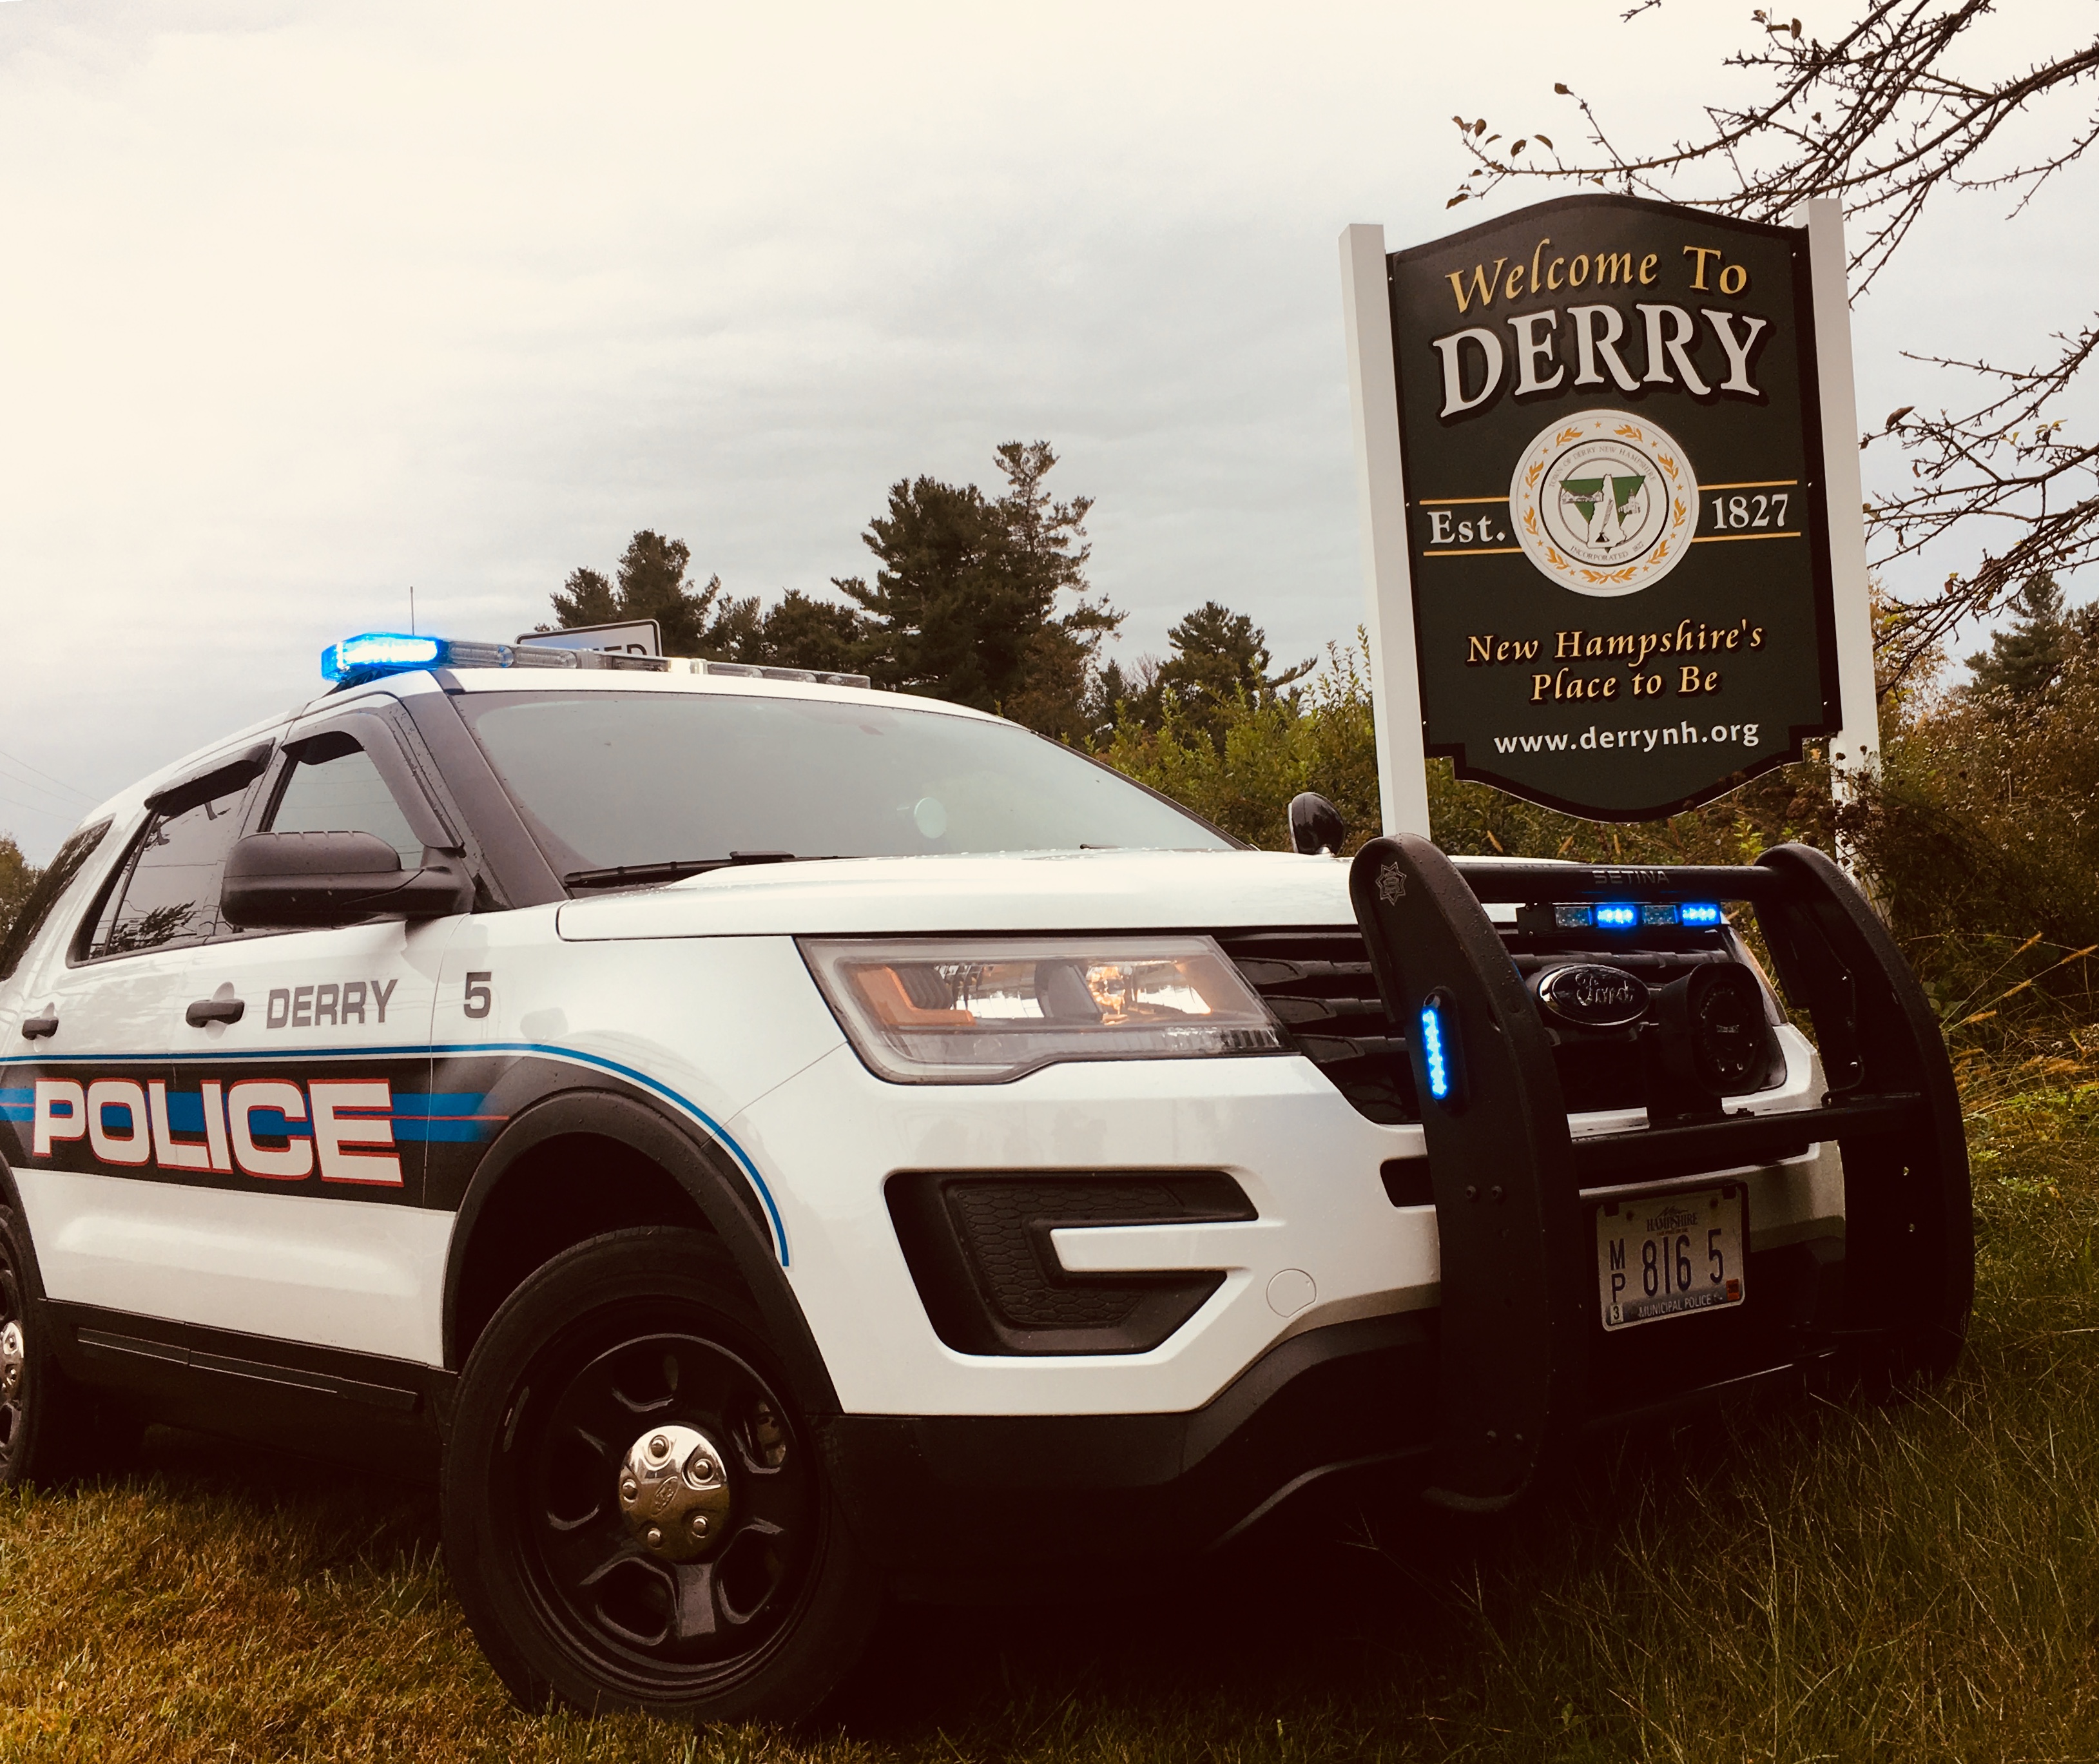 Derry Police Department, NH Police Jobs